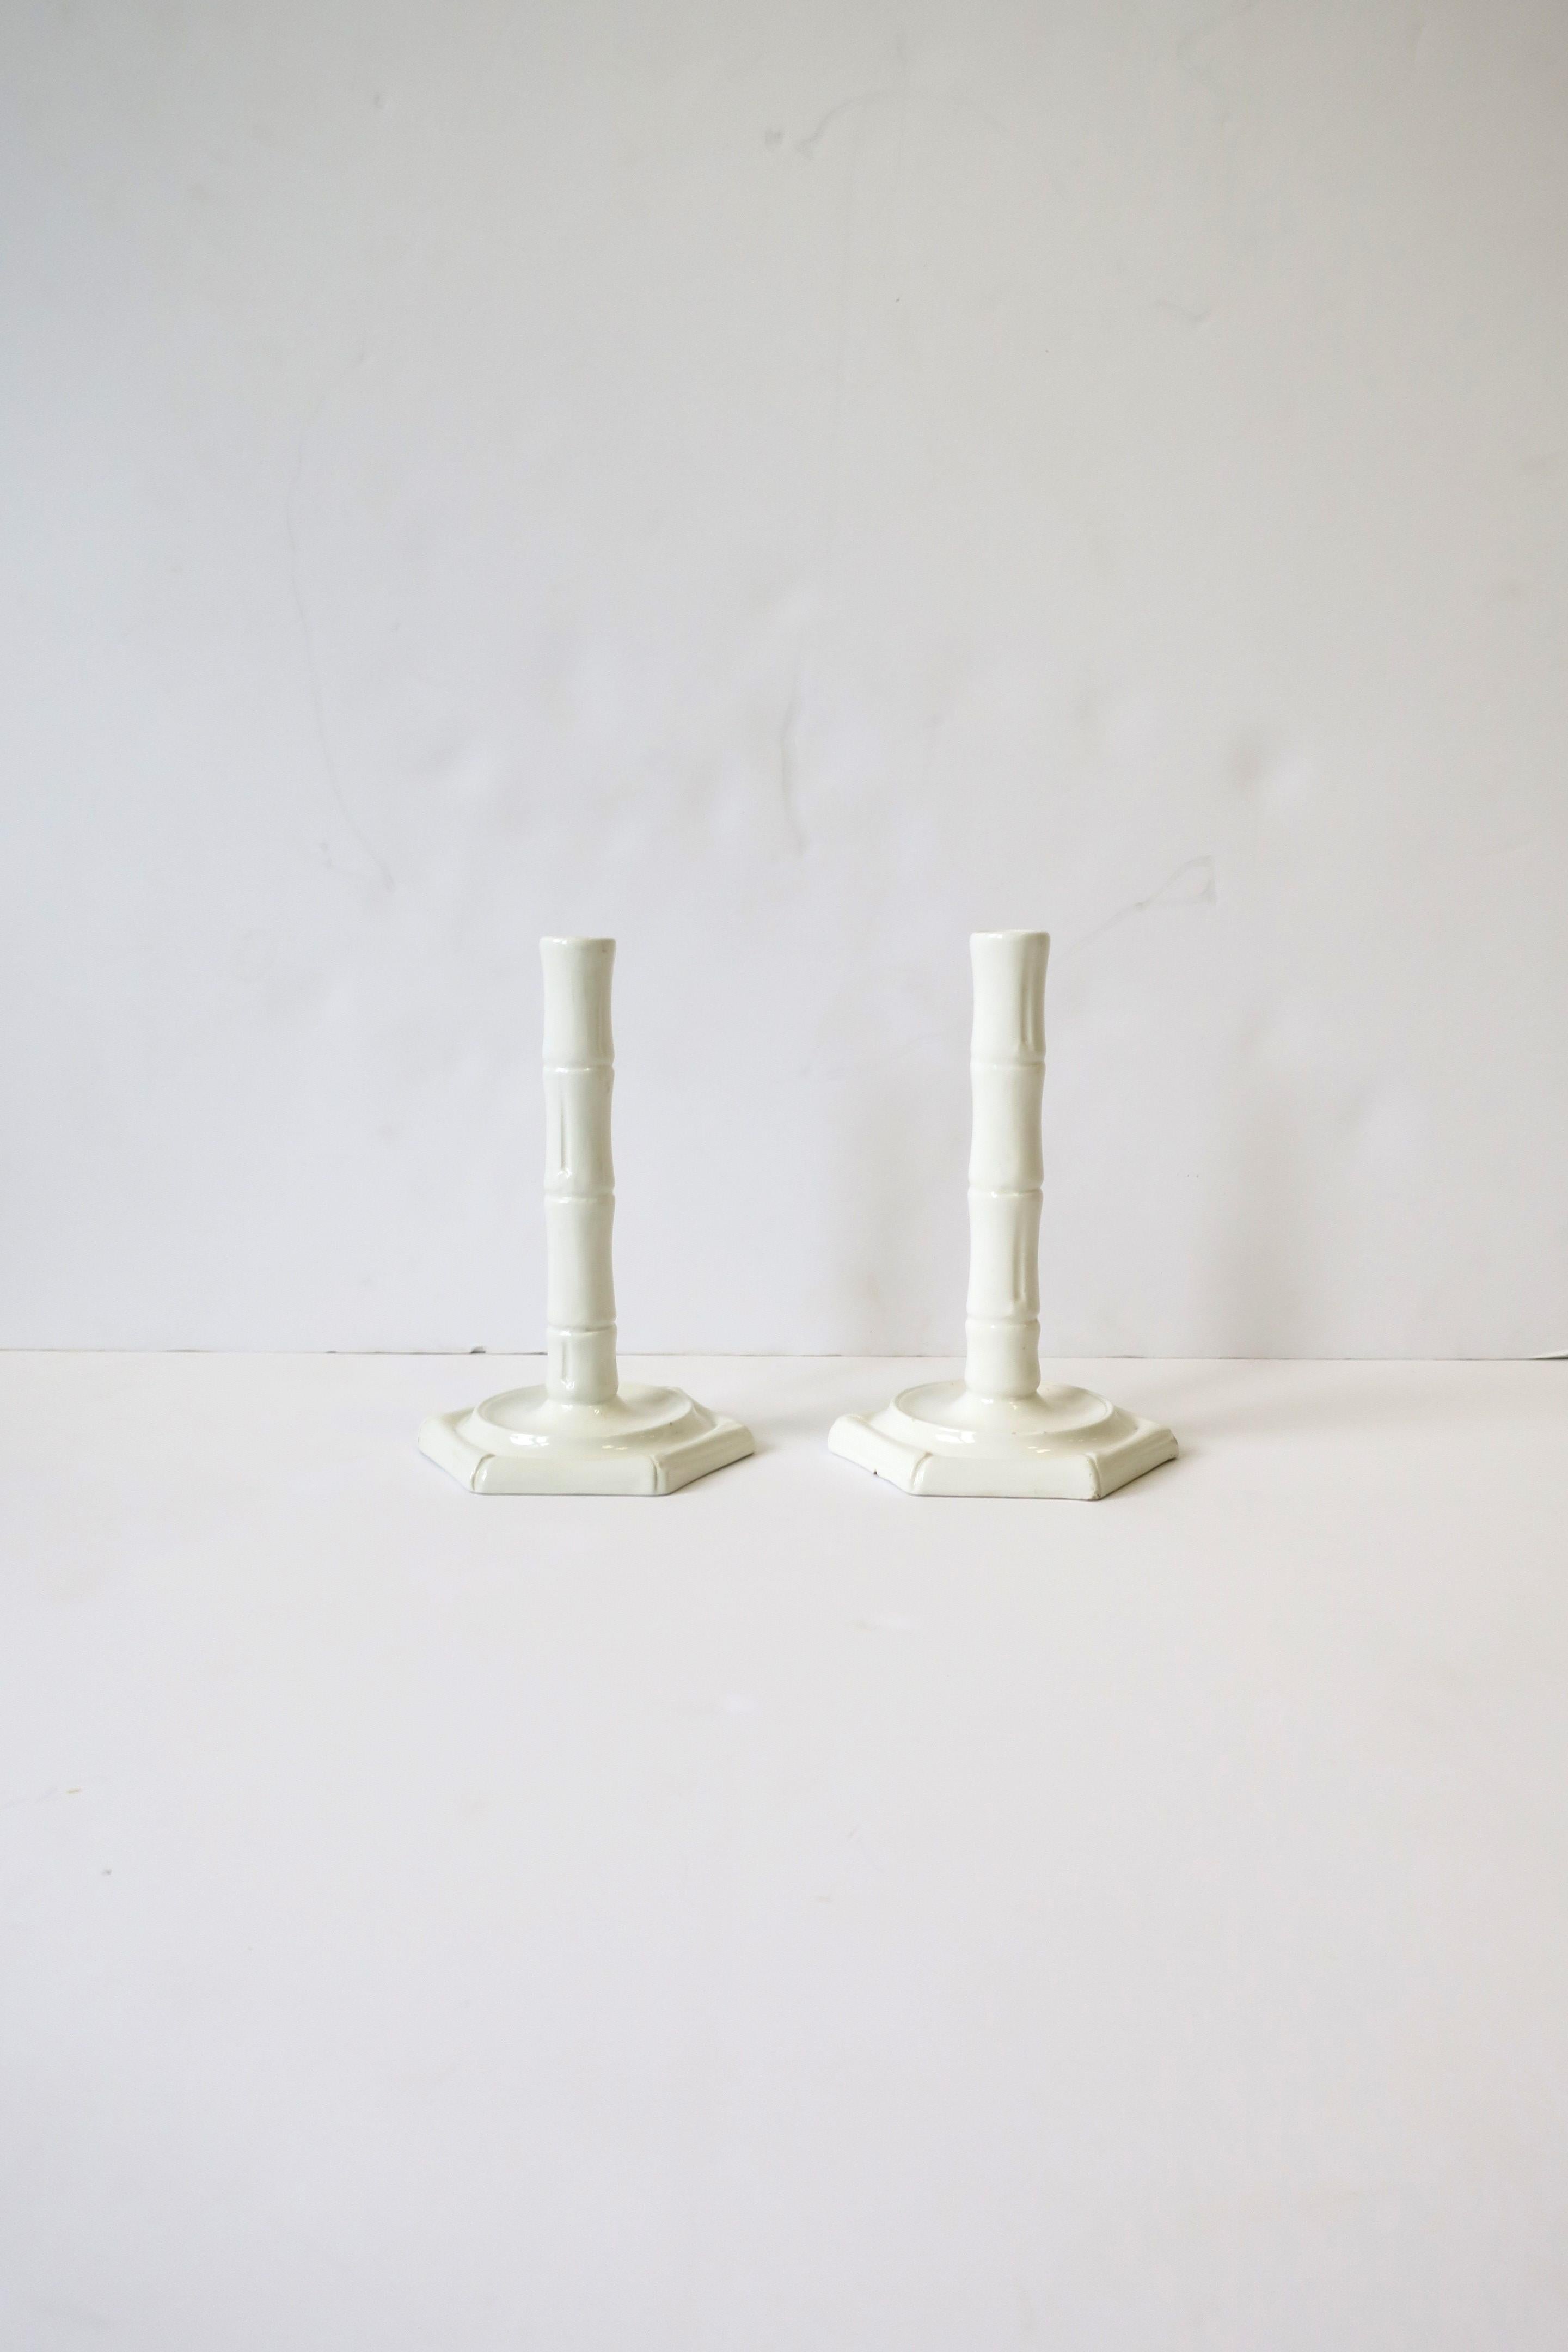 A pair of Italian white ceramic porcelain candlestick holders with bamboo design, in the Chinoiserie style, by Este Ceramiche Porcellane, circa mid-20th century, 1960s, Italy. Set has a hexagon base which is a nice alternative to round. With makers'